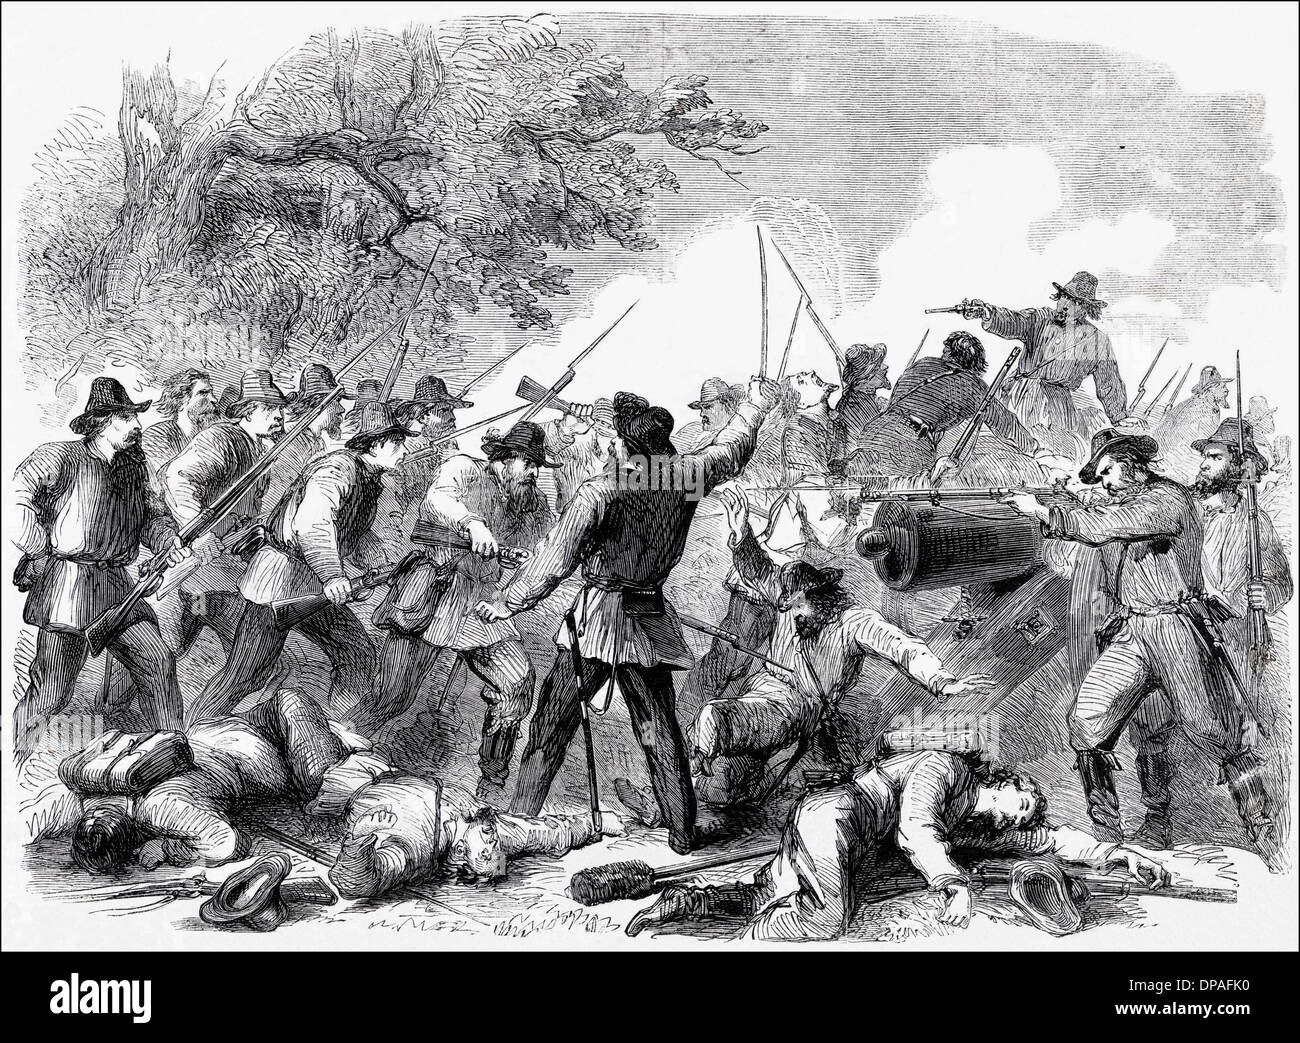 American Civil War 1861 - 1865 Colonel Fitch & the 46th Indiana Volunteers taking the Confederate Battery of Fort St Charles on the White River Arkansas. Victorian woodcut engraving circa 1862 Stock Photo